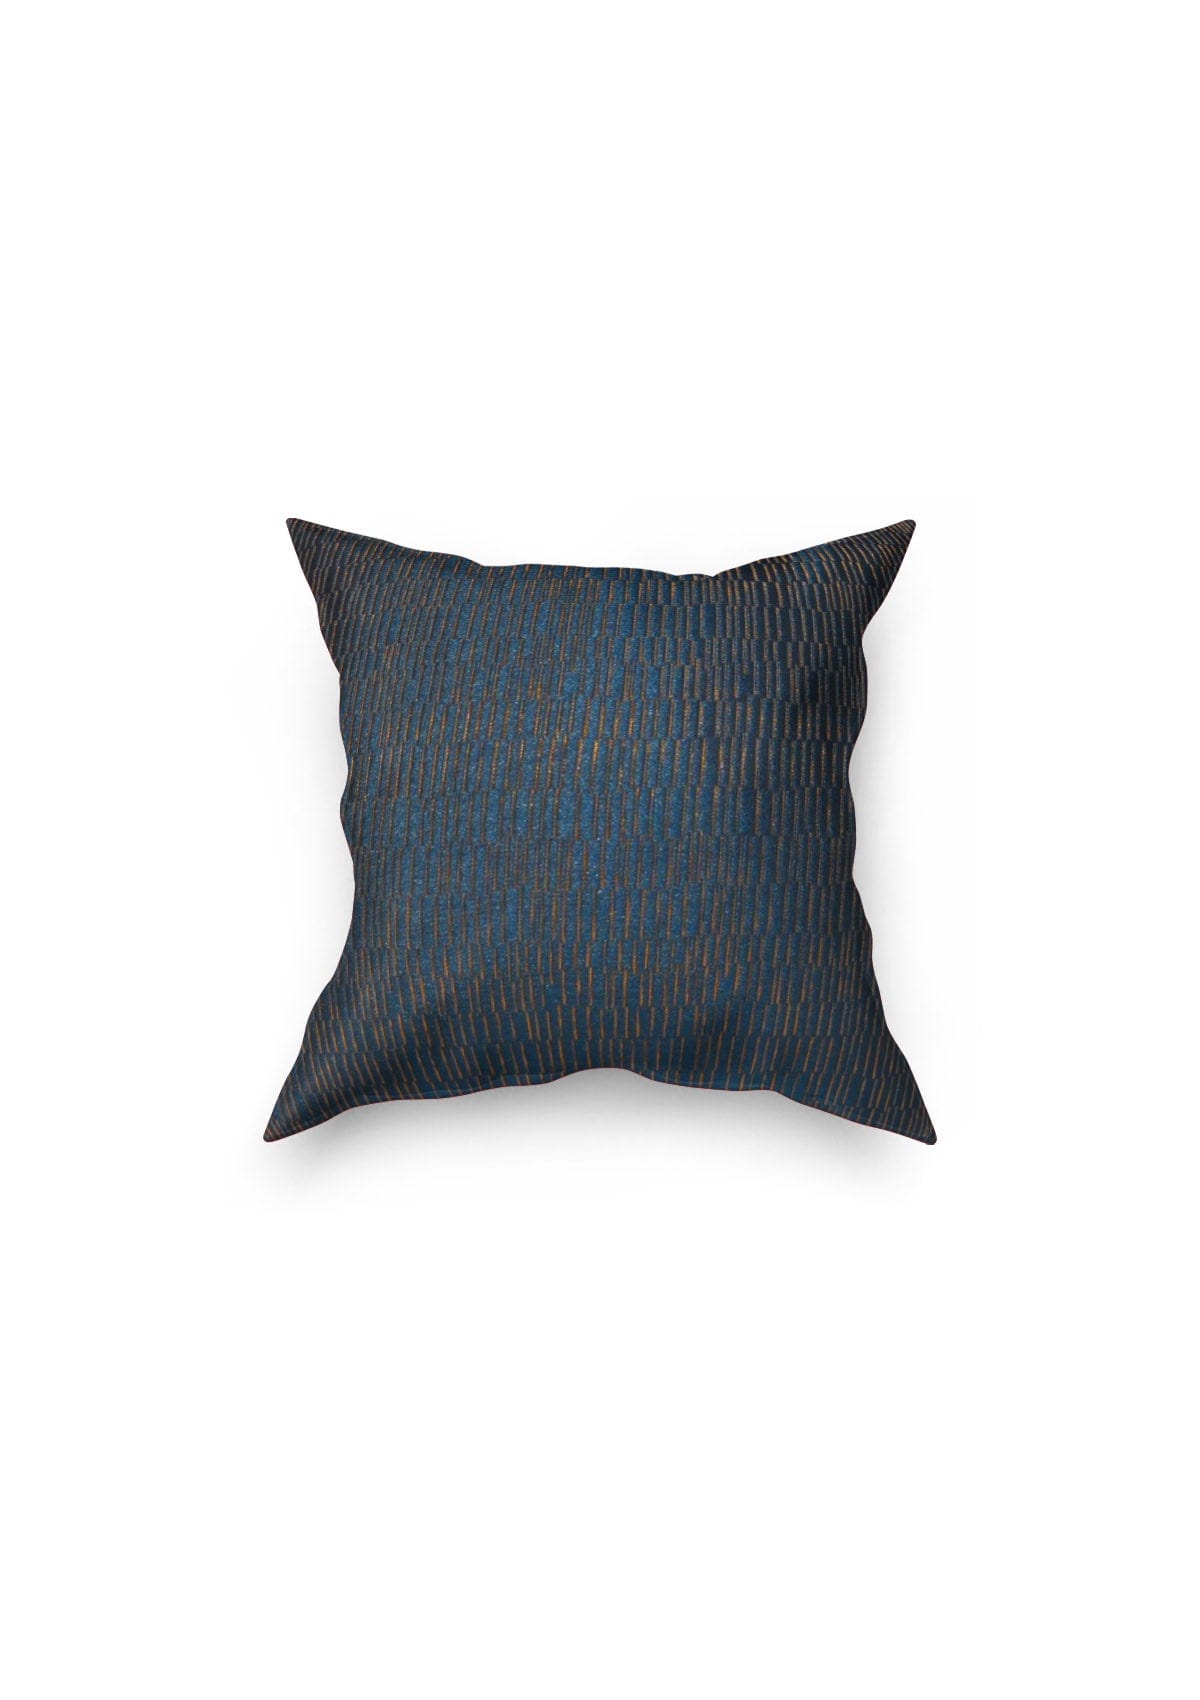  Blue and Gold Cushion Covers | CovermyCushion